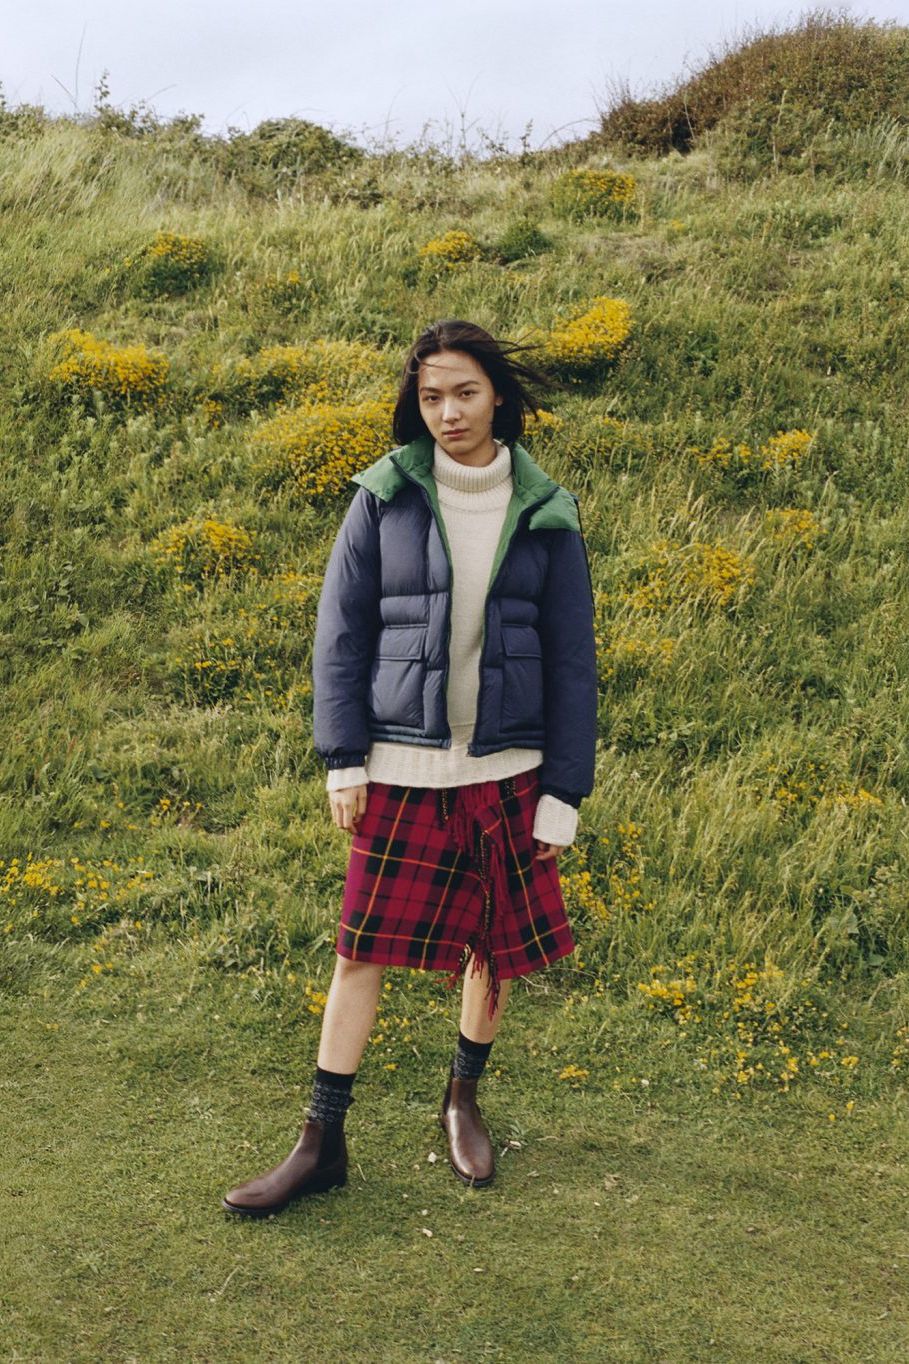 JW Anderson x Uniqlo launch their latest collaboration